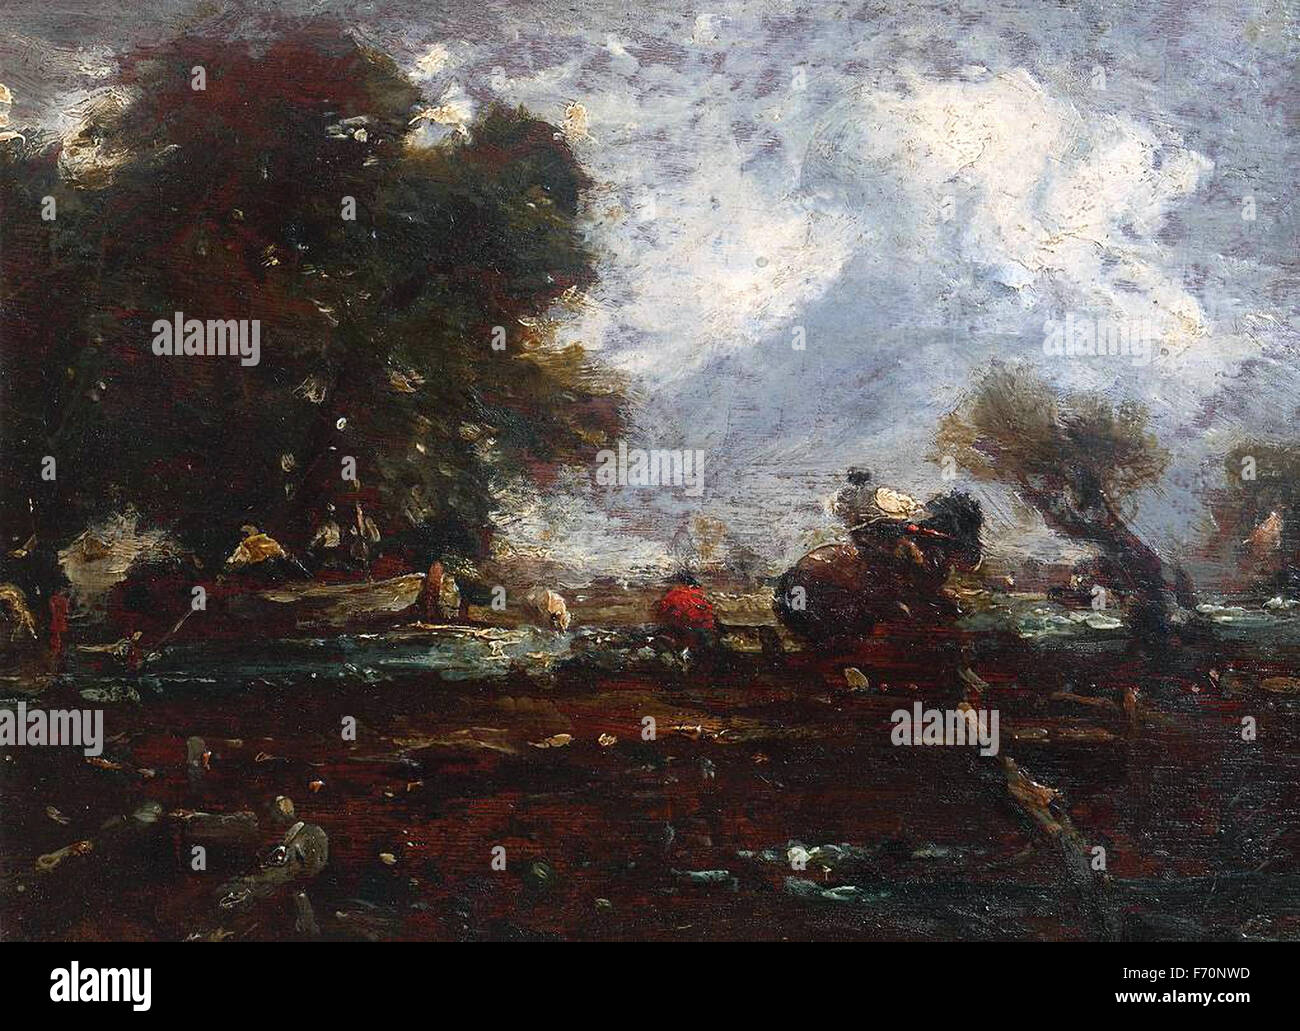 John Constable - The Leaping Horse Stock Photo